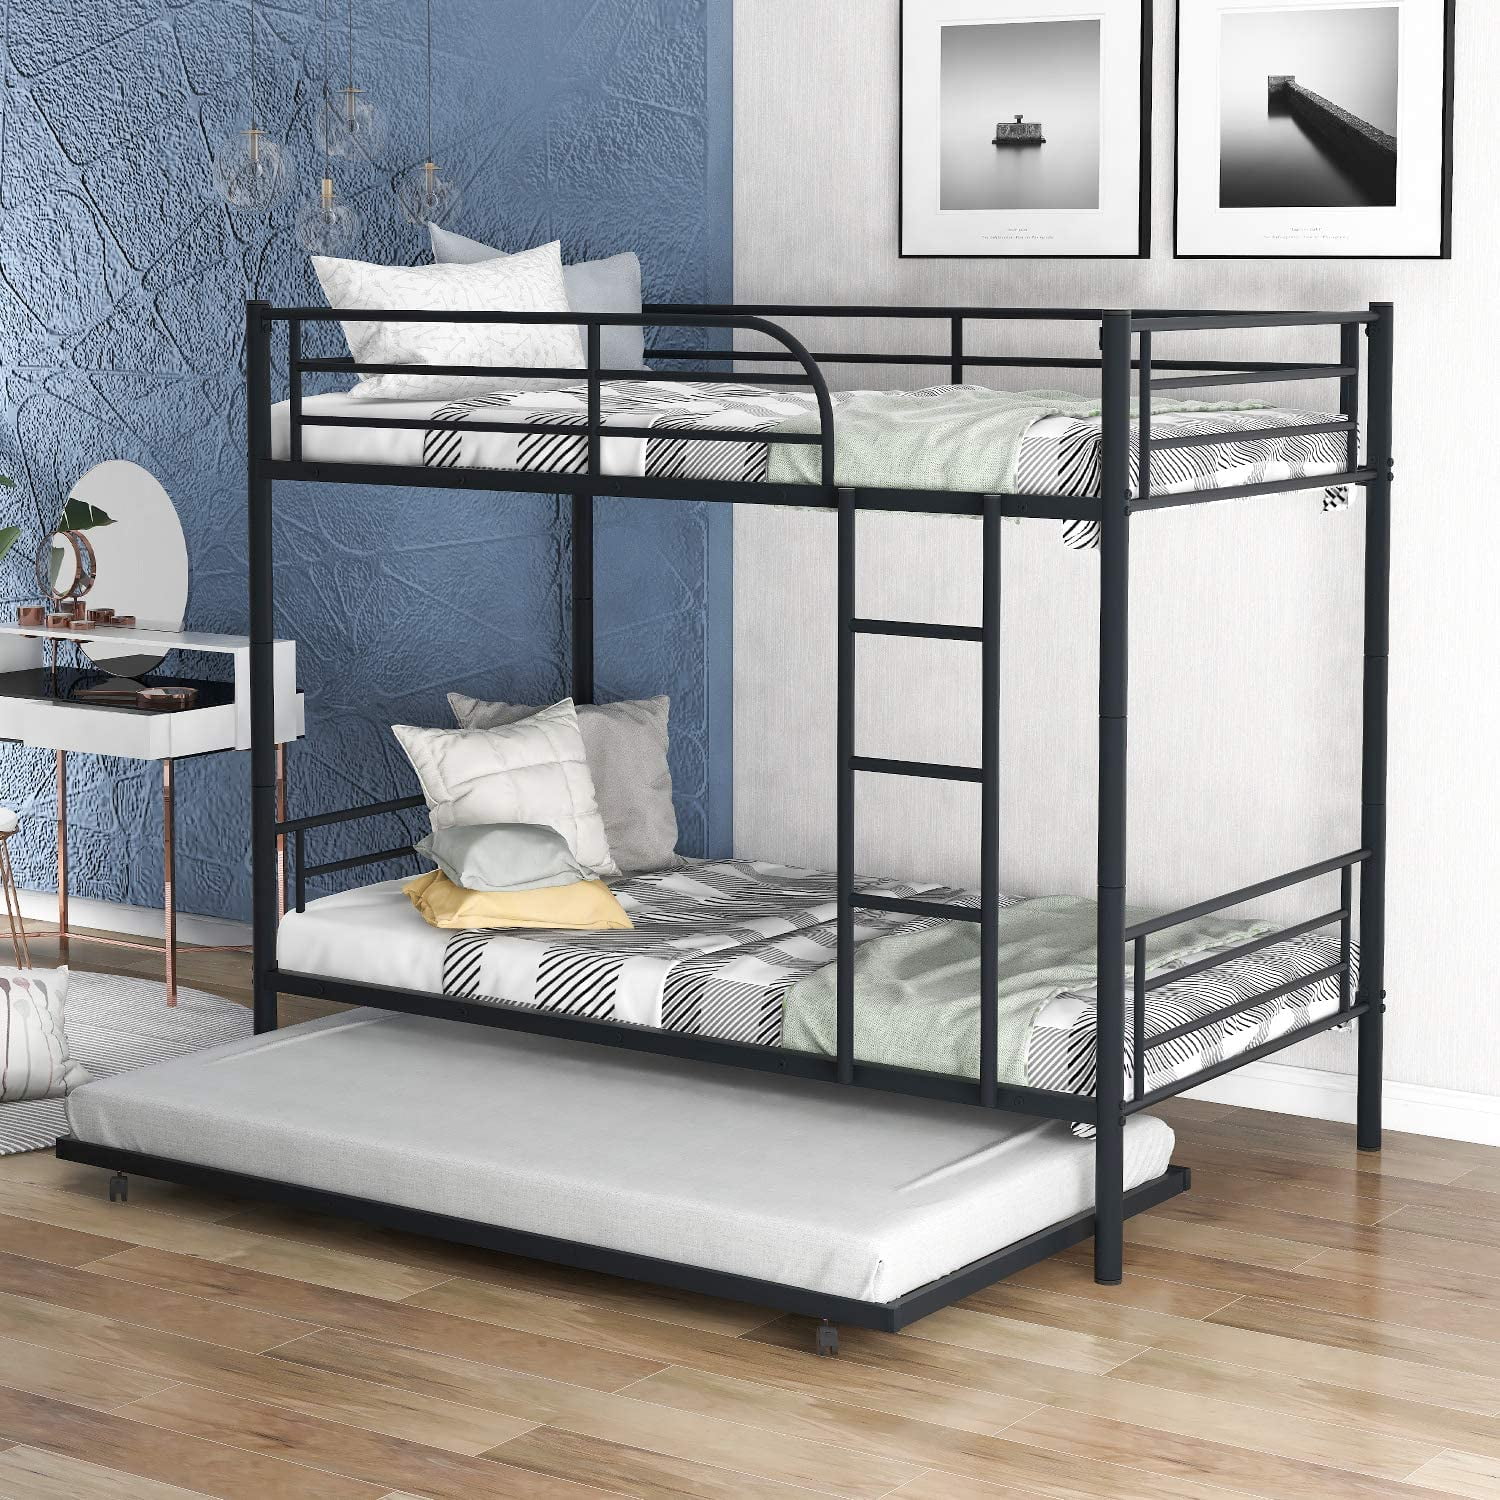 Churanty Twin Over Metal Bunk Bed, Twin Size Metal Bunk Beds